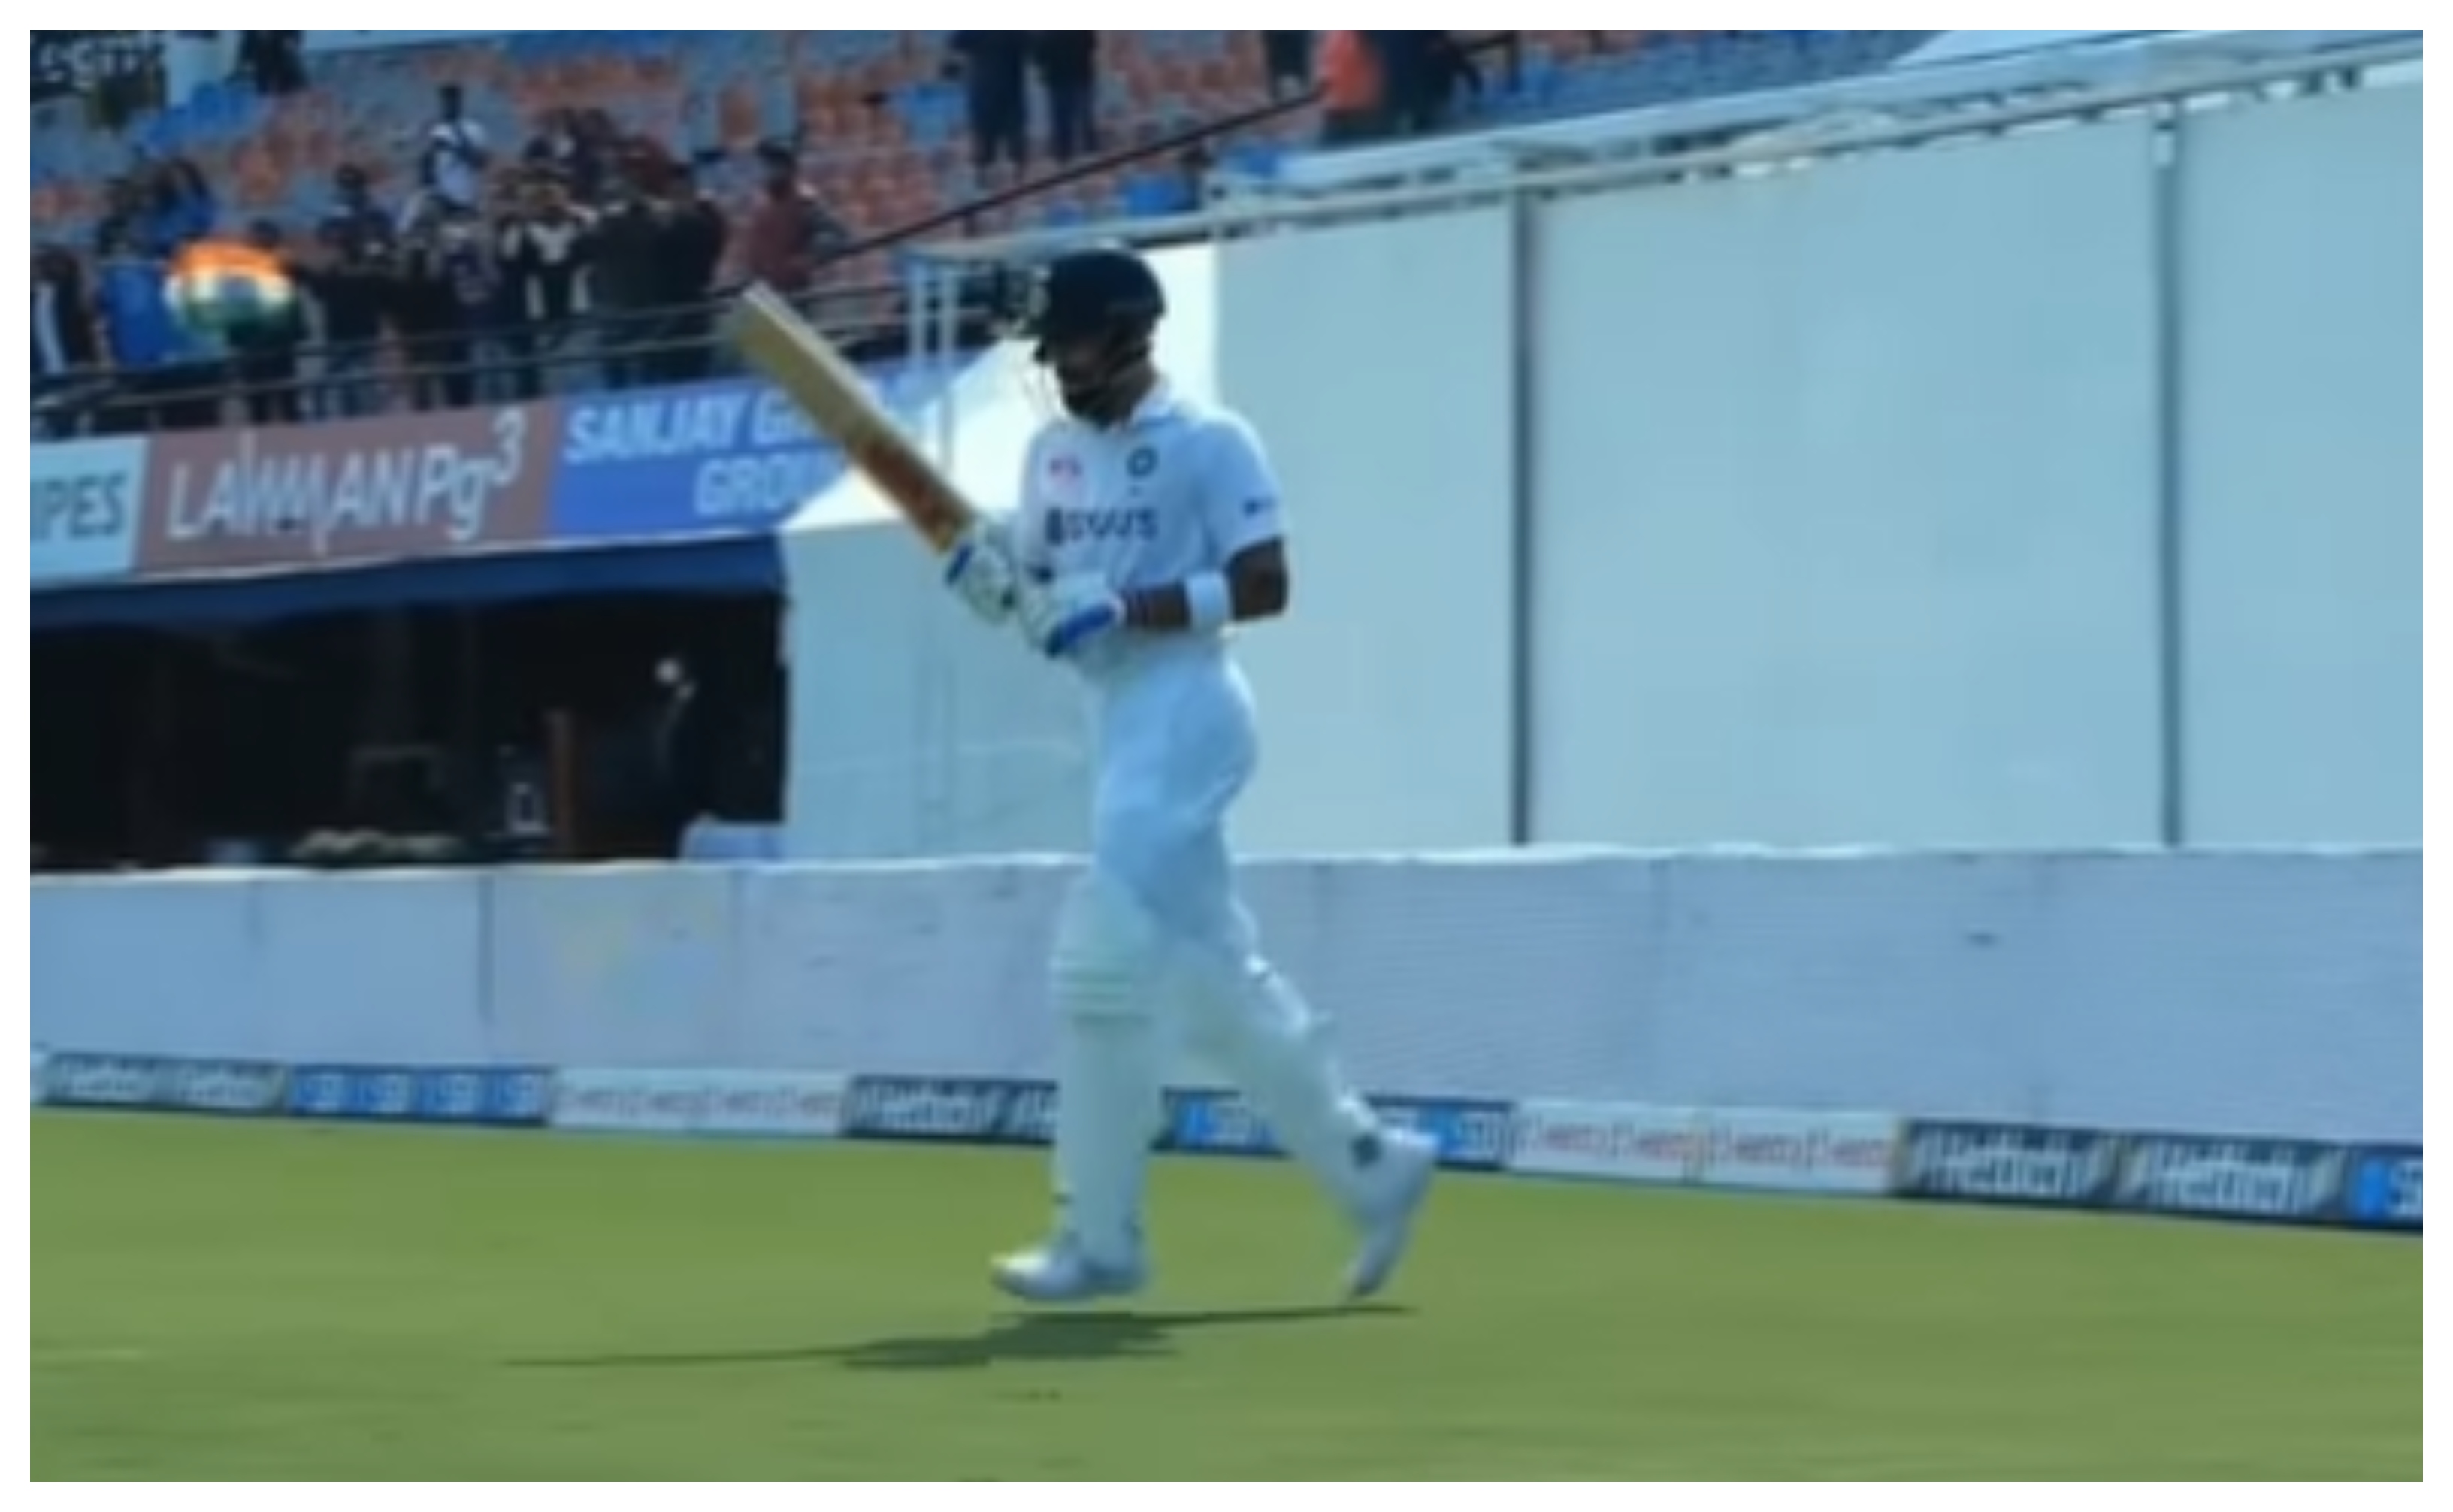 Virat Kohli received a rousing reception from the Mohali crowd | BCCI/Screengrab